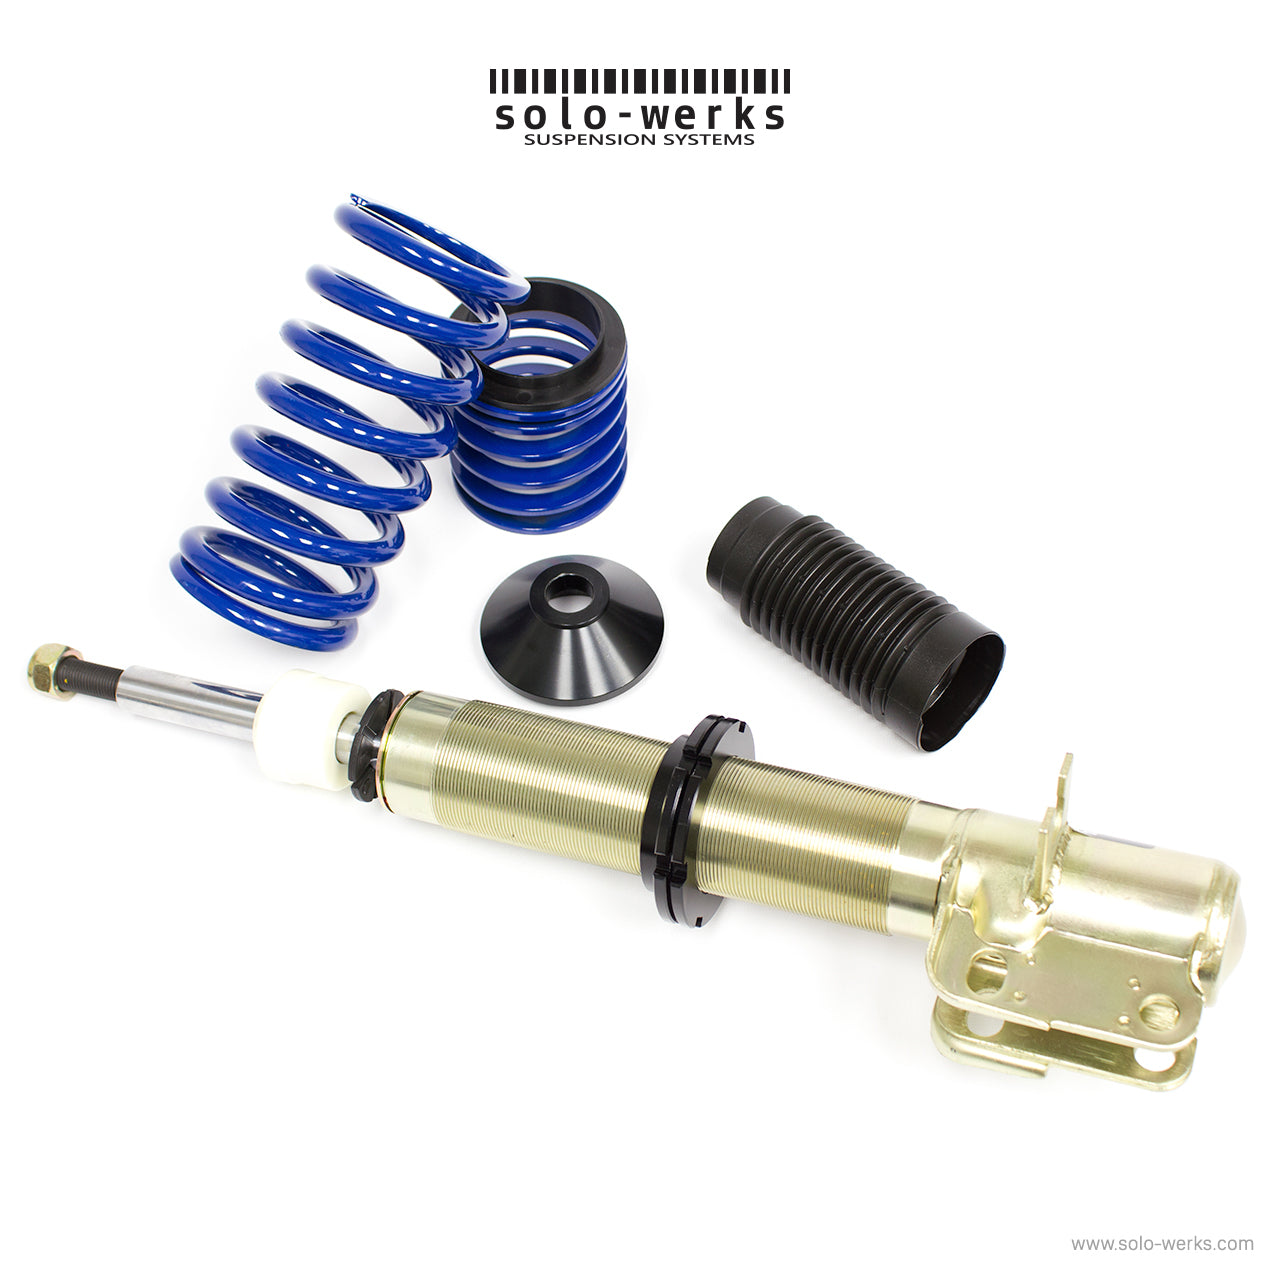 SOLO WERKS S1 COILOVER SYSTEM - VW '79-'84 MK1 CADDY PICKUP - 0